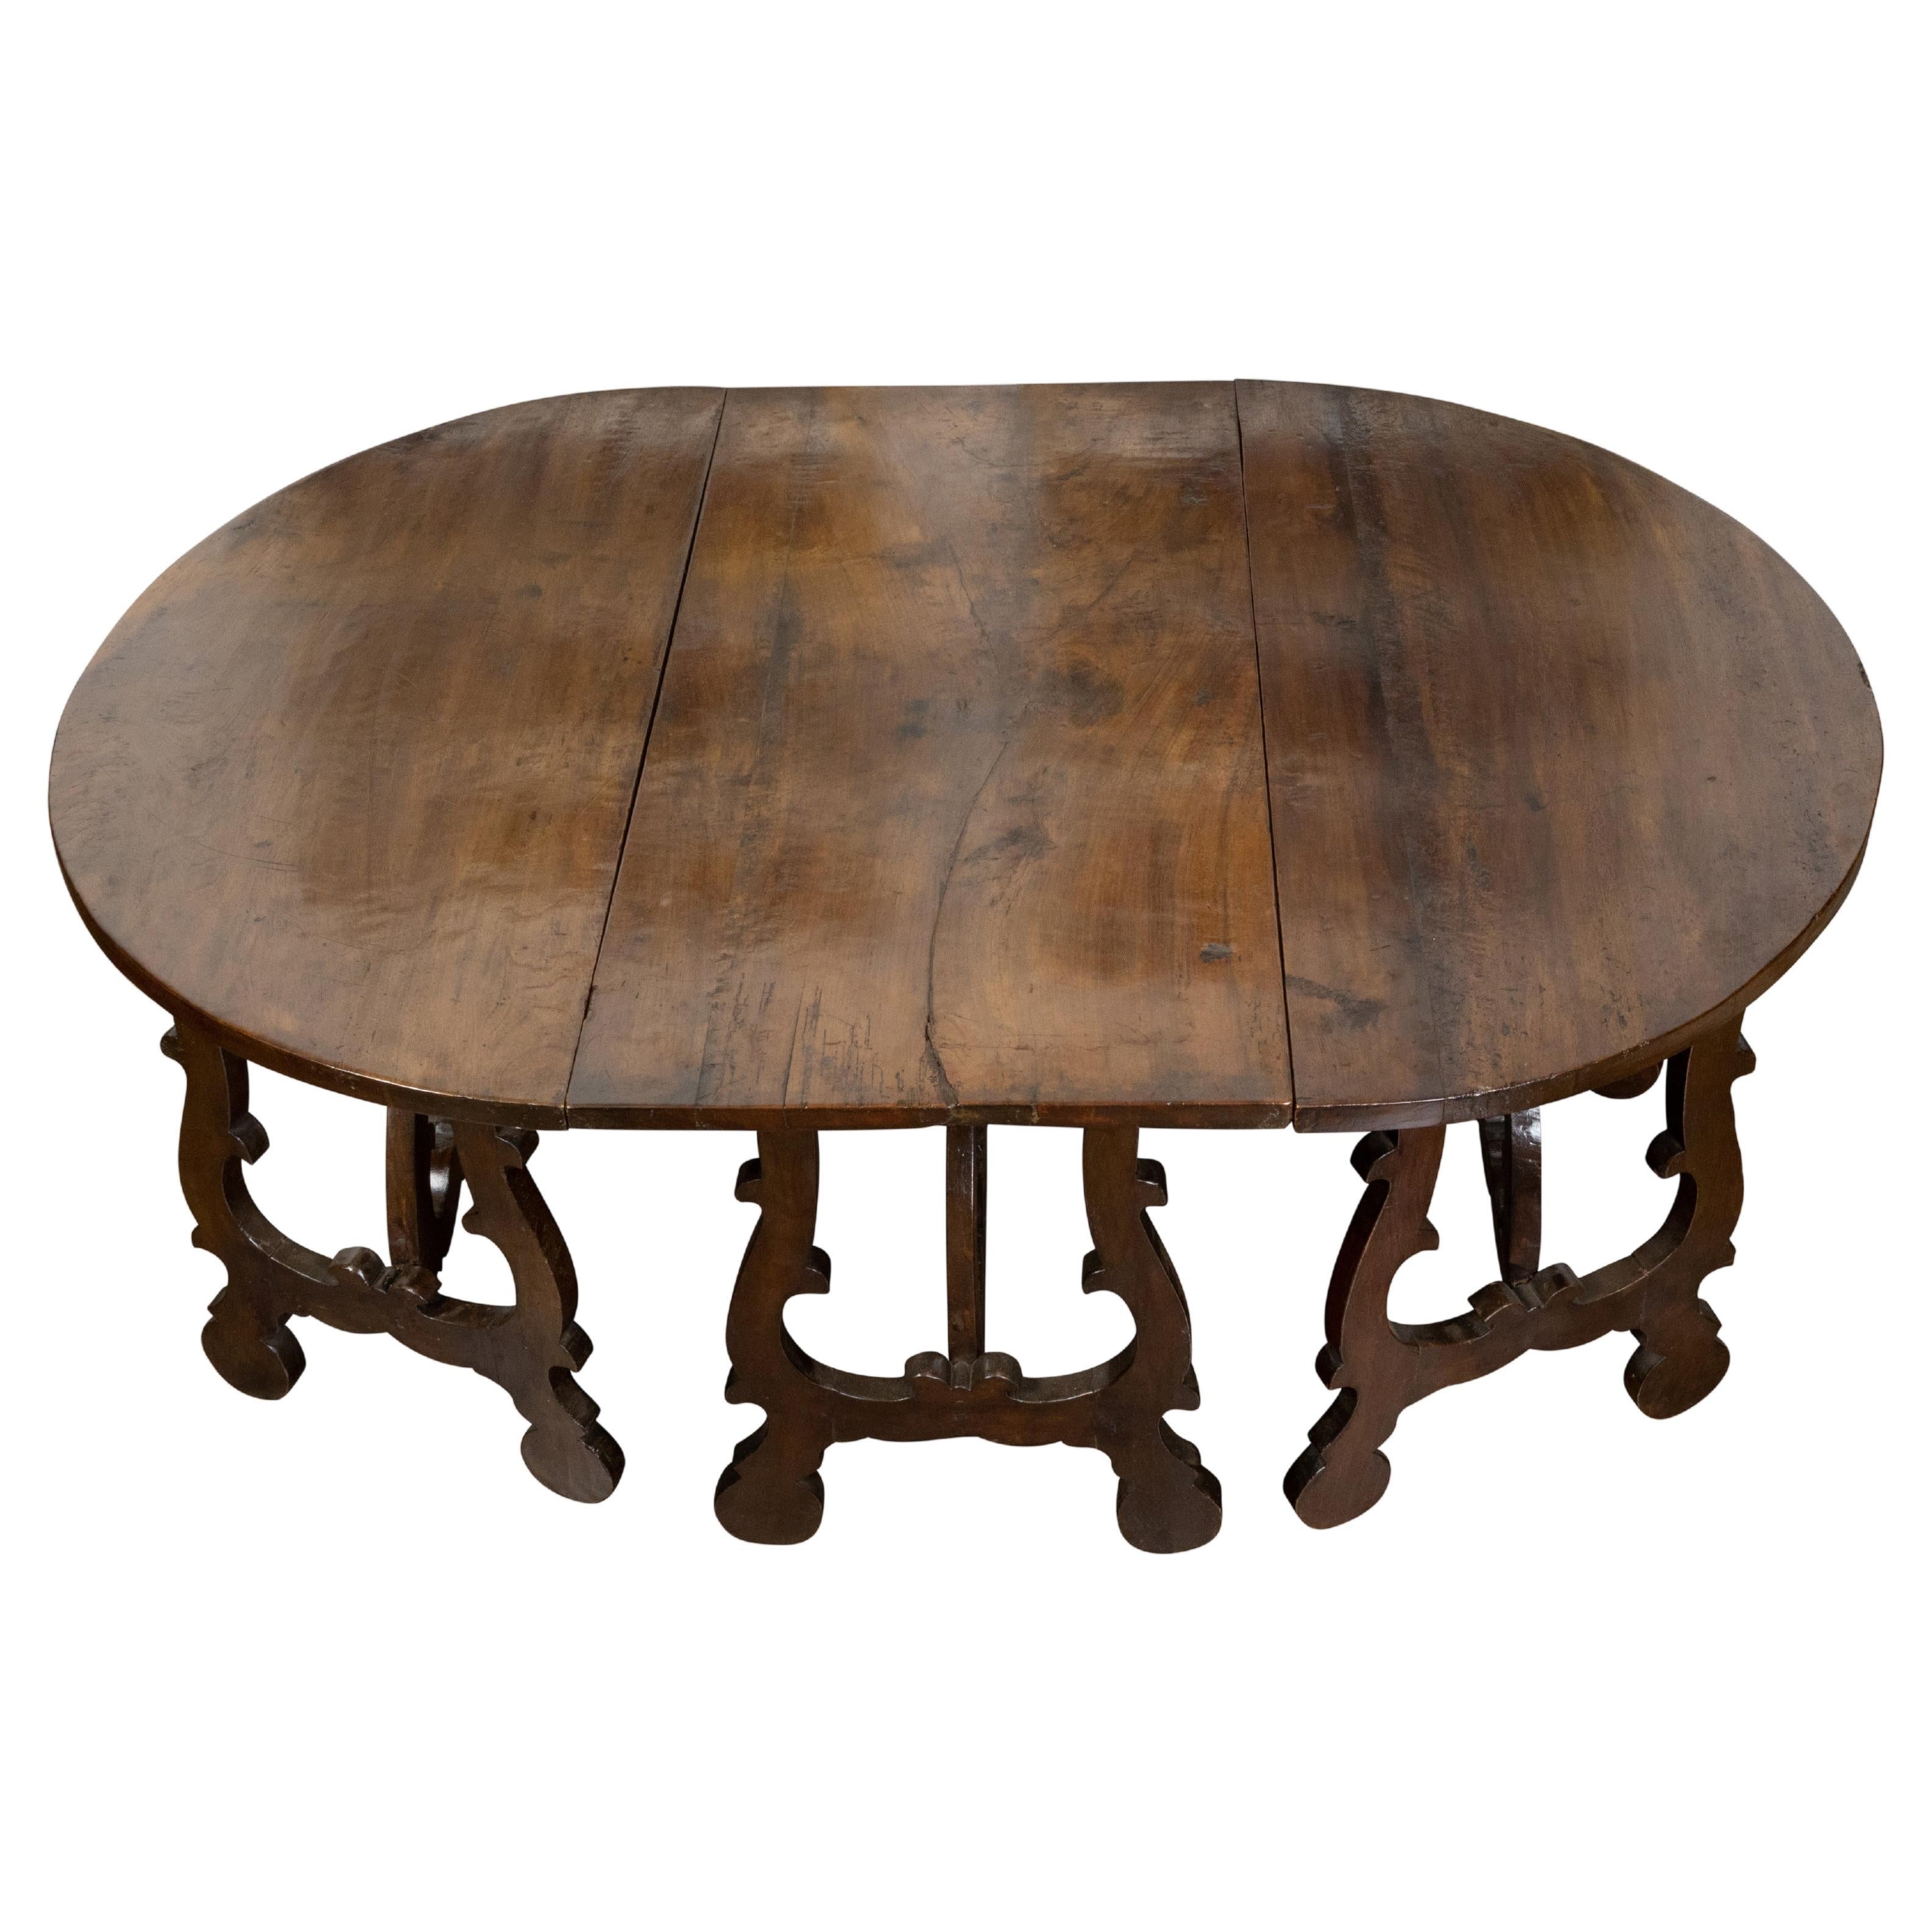 Three-Piece Italian Baroque Style Oval Top Table with Carved Lyre Shaped Legs